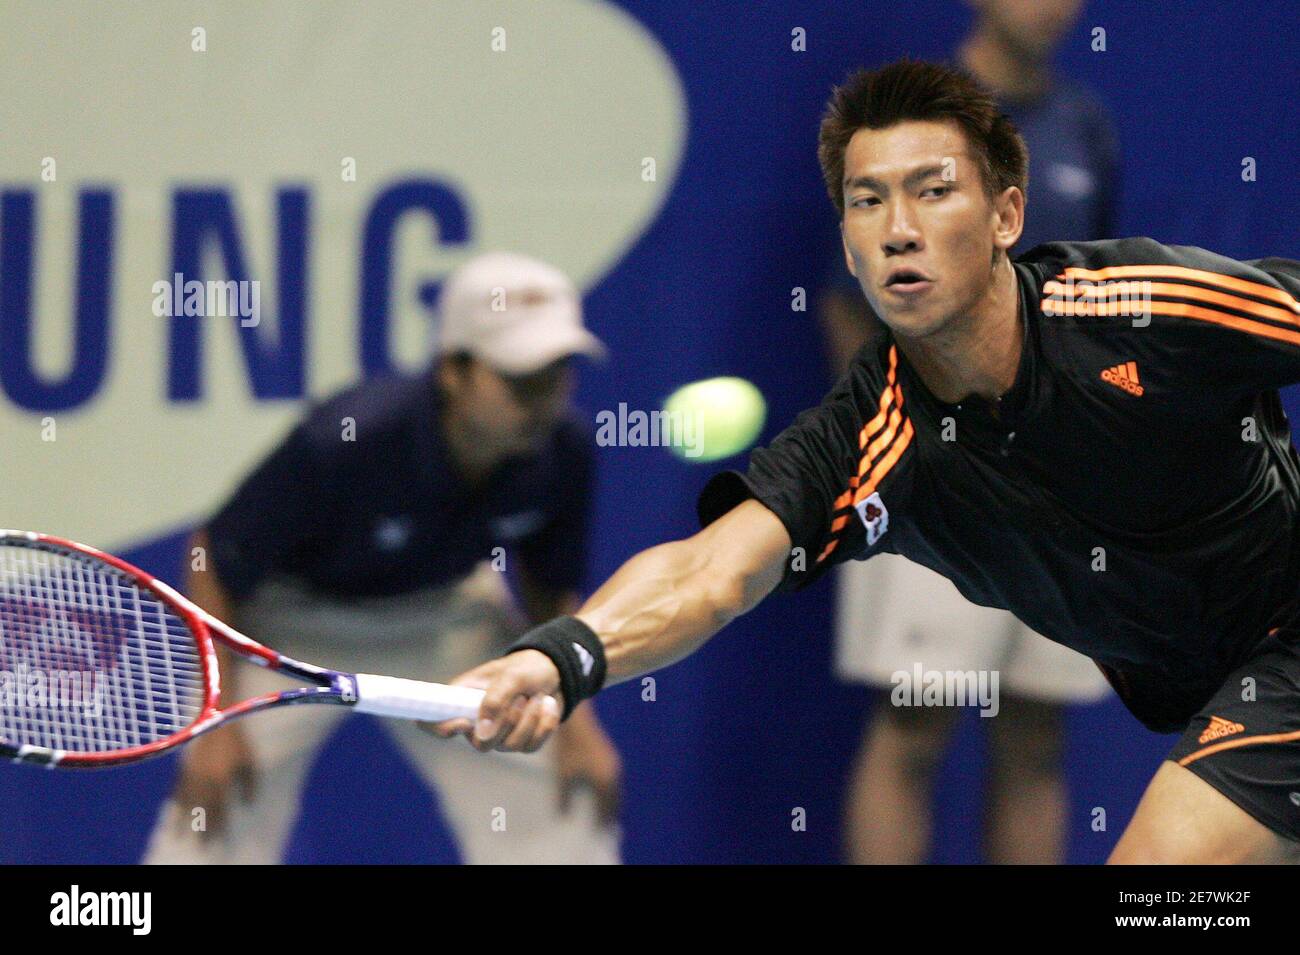 Thailand's Paradorn Srichaphan hits a forehand to Ti Chen of Taiwan during  their match at the Thailand Open 2005 tennis tournament in Bangkok  September 27, 2005. Paradorn won 6-3 6-4. REUTERS/Chaiwat Subprasom Stock  Photo - Alamy